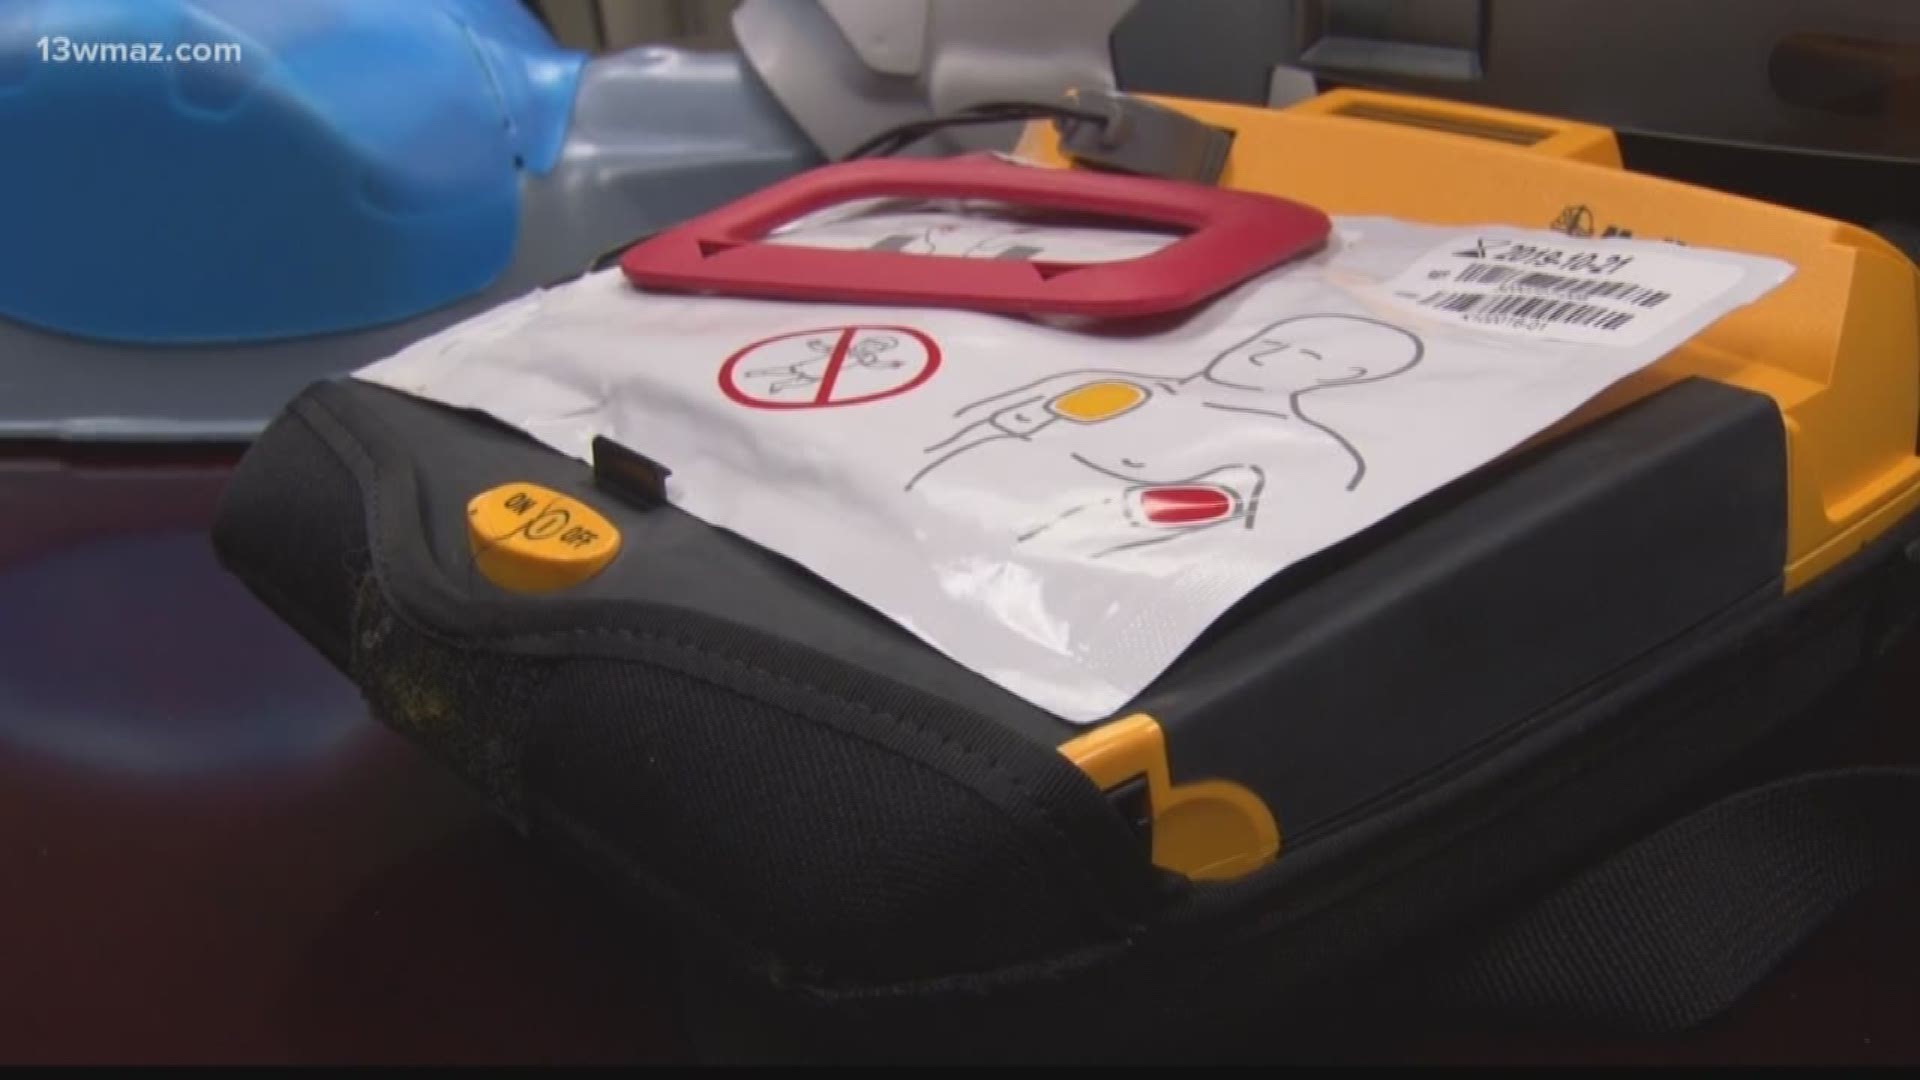 In some Central Georgia schools, if a student-athlete needs CPR, there would be no coaches or medical staff trained to help. The American Heart Association estimates less than 10 percent of students in that situation would survive.Just 2 weeks ago, the Georgia High School Association approved a rule change designed to tackle this issue.